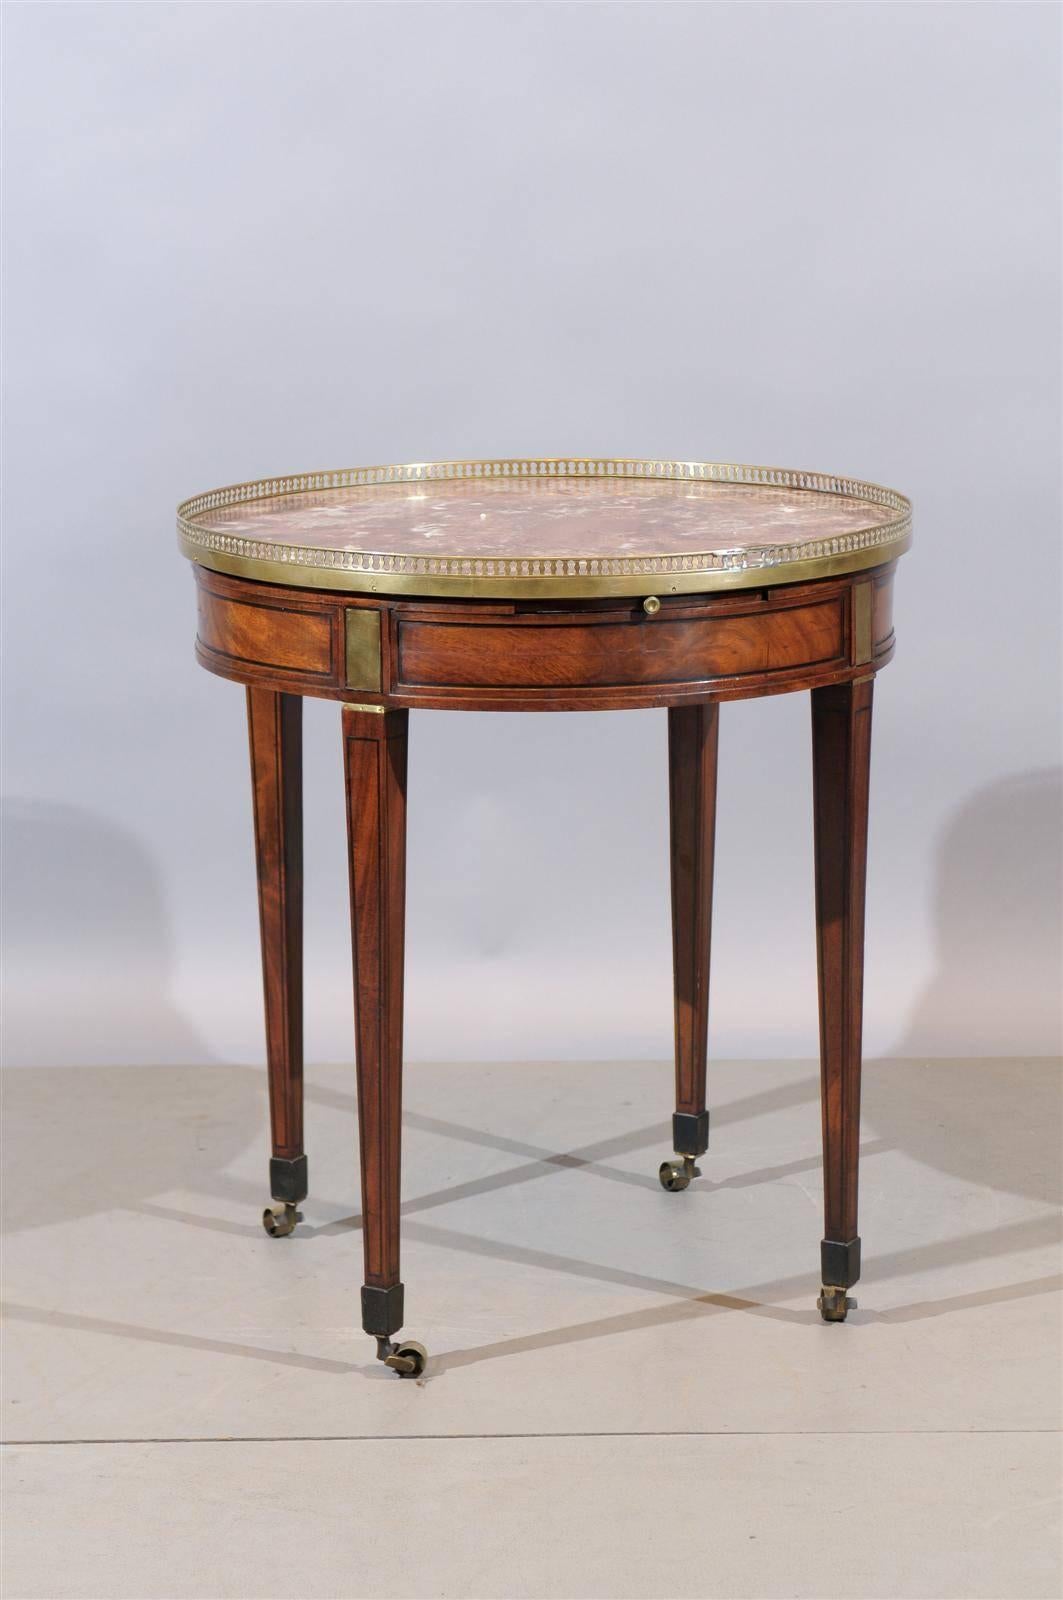 A Louis XVI style walnut bouillotte table with marble top, brass gallery and mounts, inlay and tapered legs with castors. 

